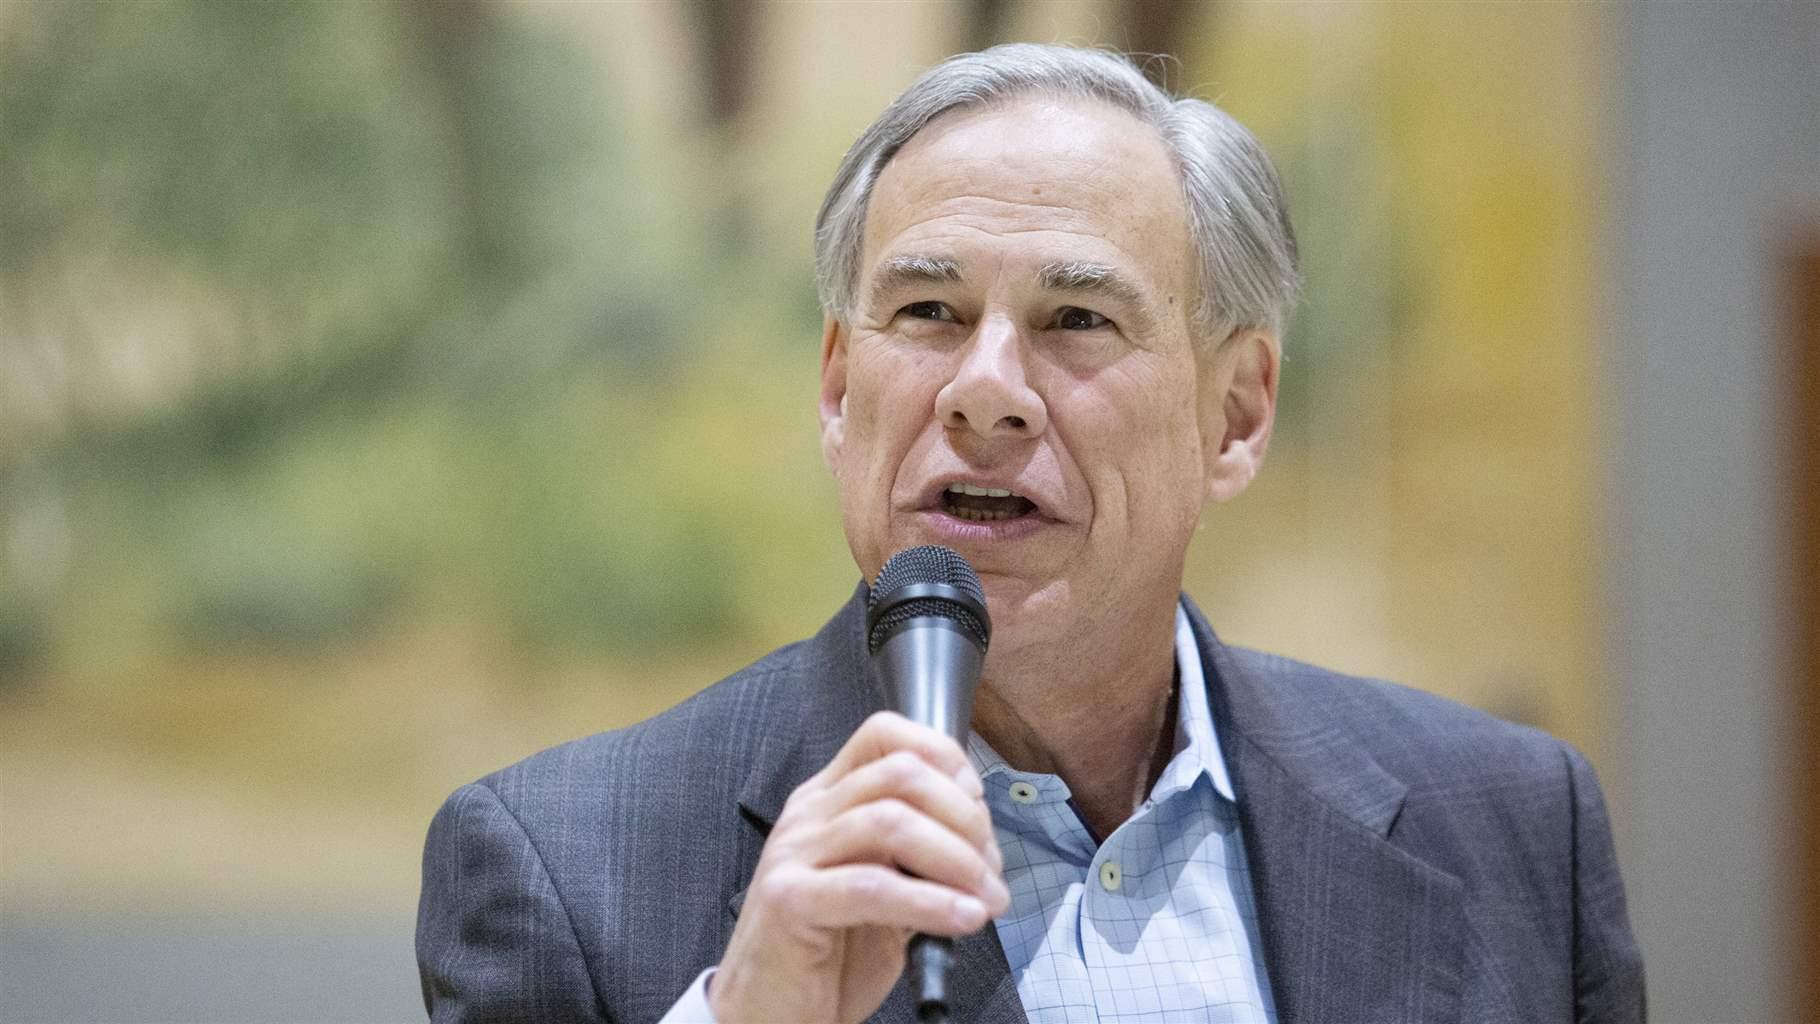 Texas Gov. Greg Abbott, a Republican, speaks at an event in February. Abbott asked the state protective services agency to investigate whether some medicine or elective surgeries are provided to transgender children.